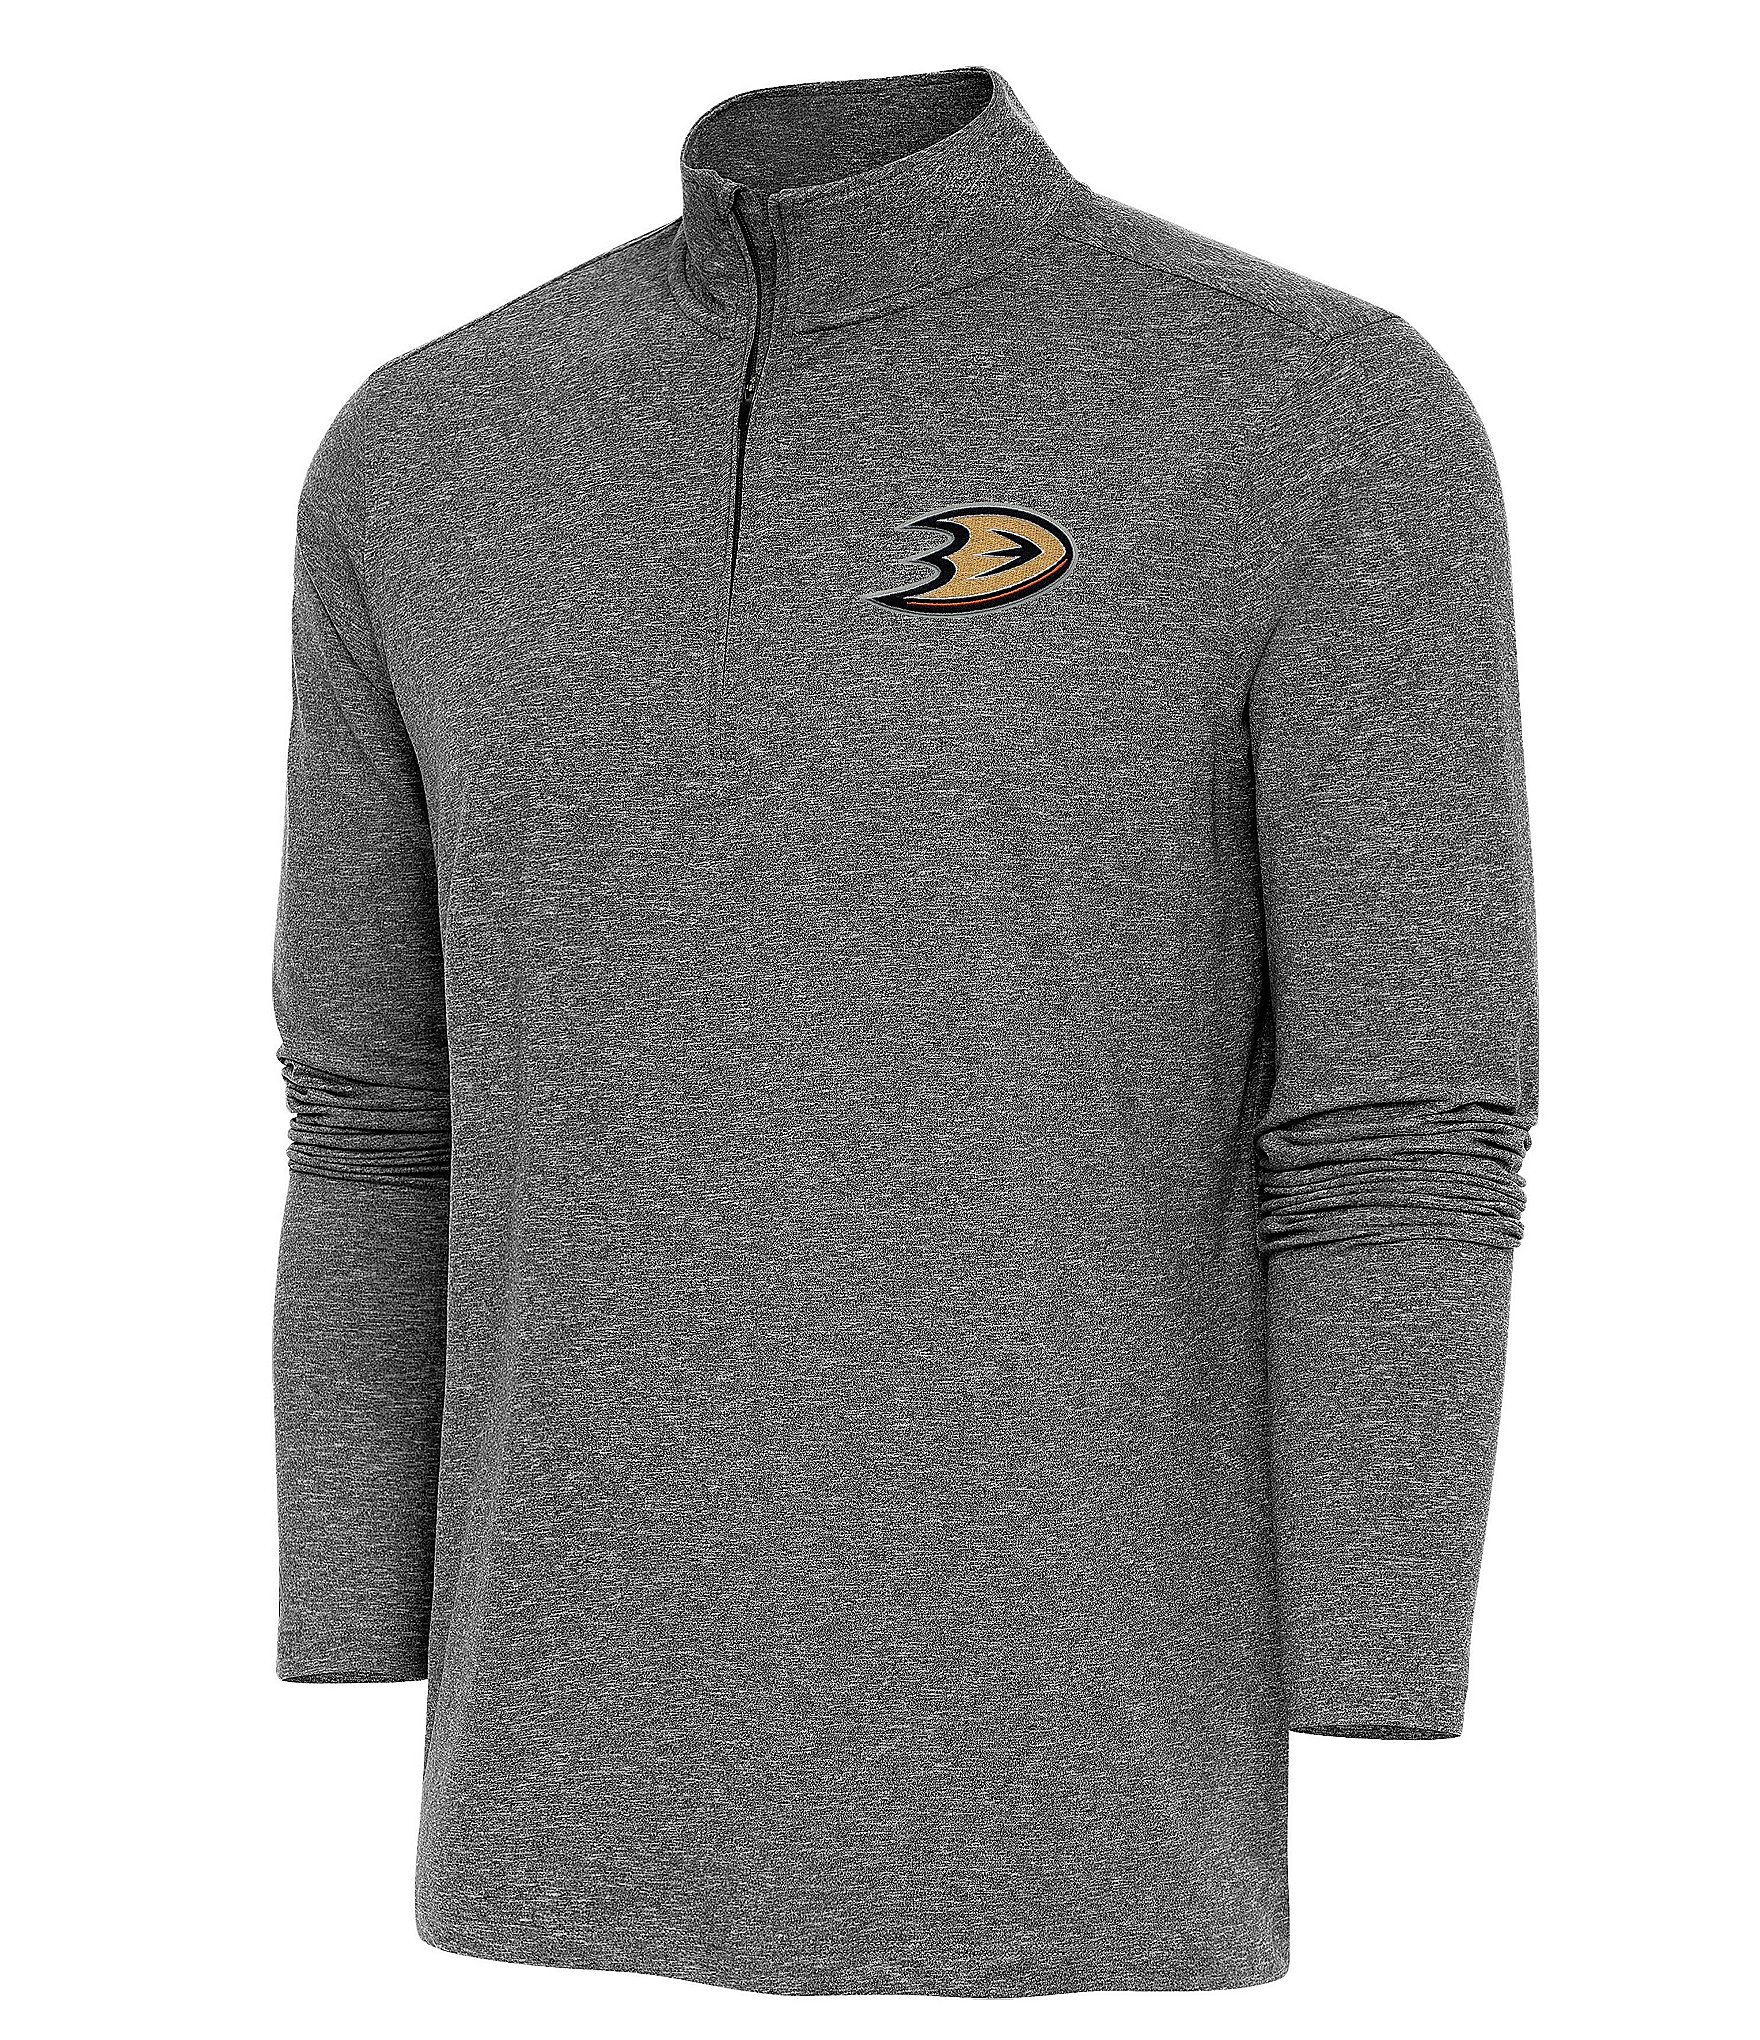 Antigua NHL Western Conference Quarter-Zip Pullover, Mens, S, St Louis Blues Black/Gold